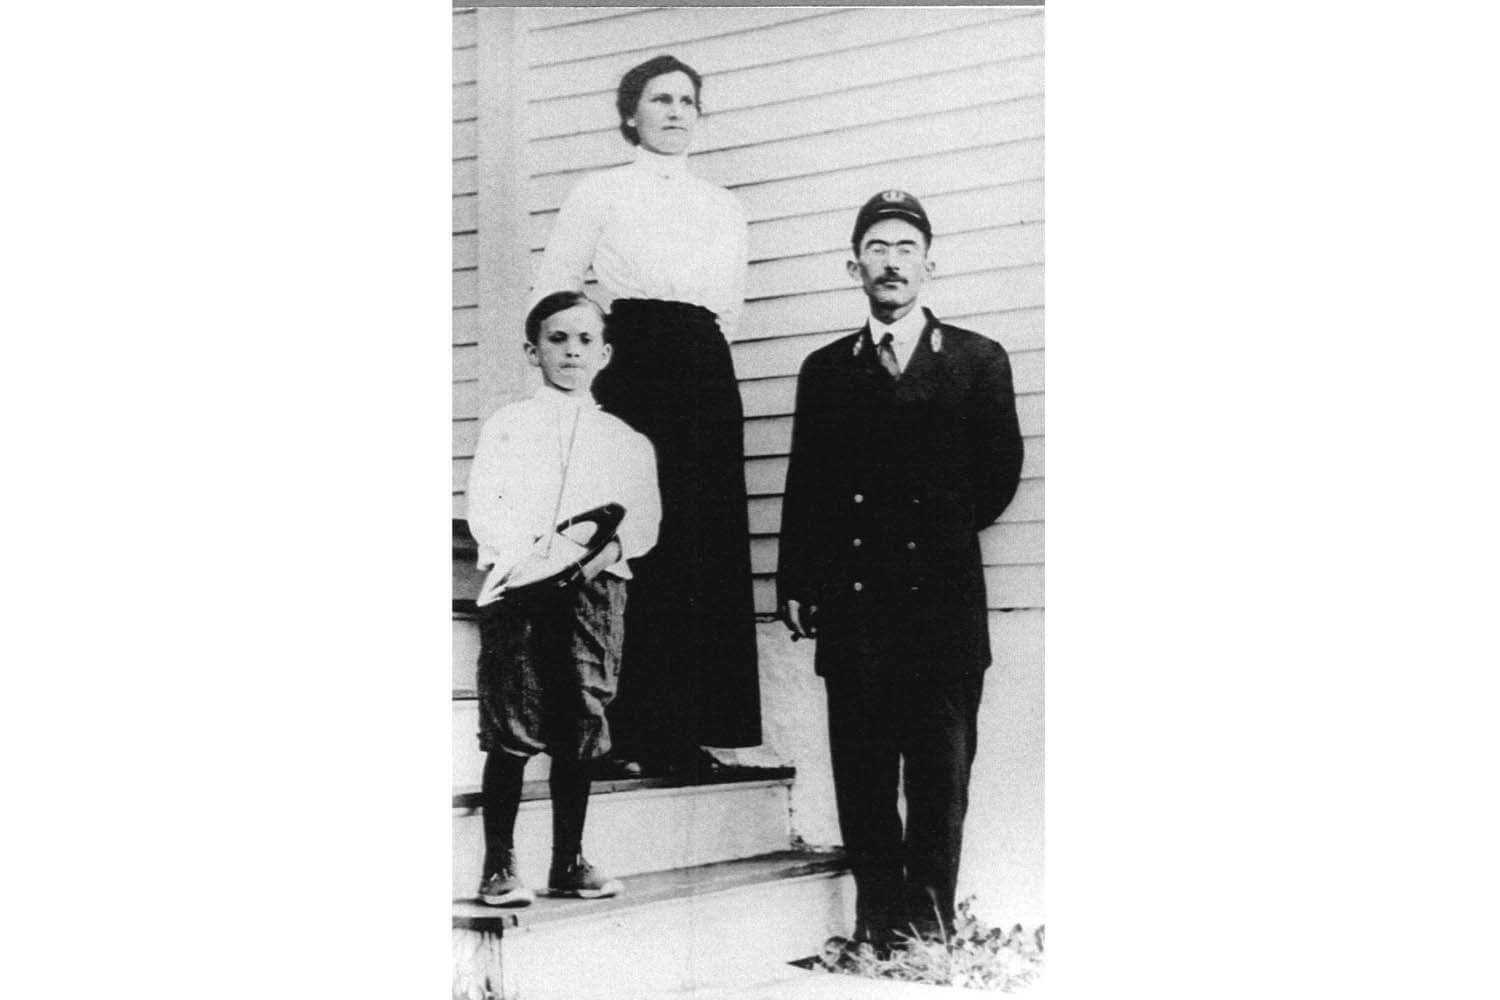 A man and woman standing on steps with a boy.